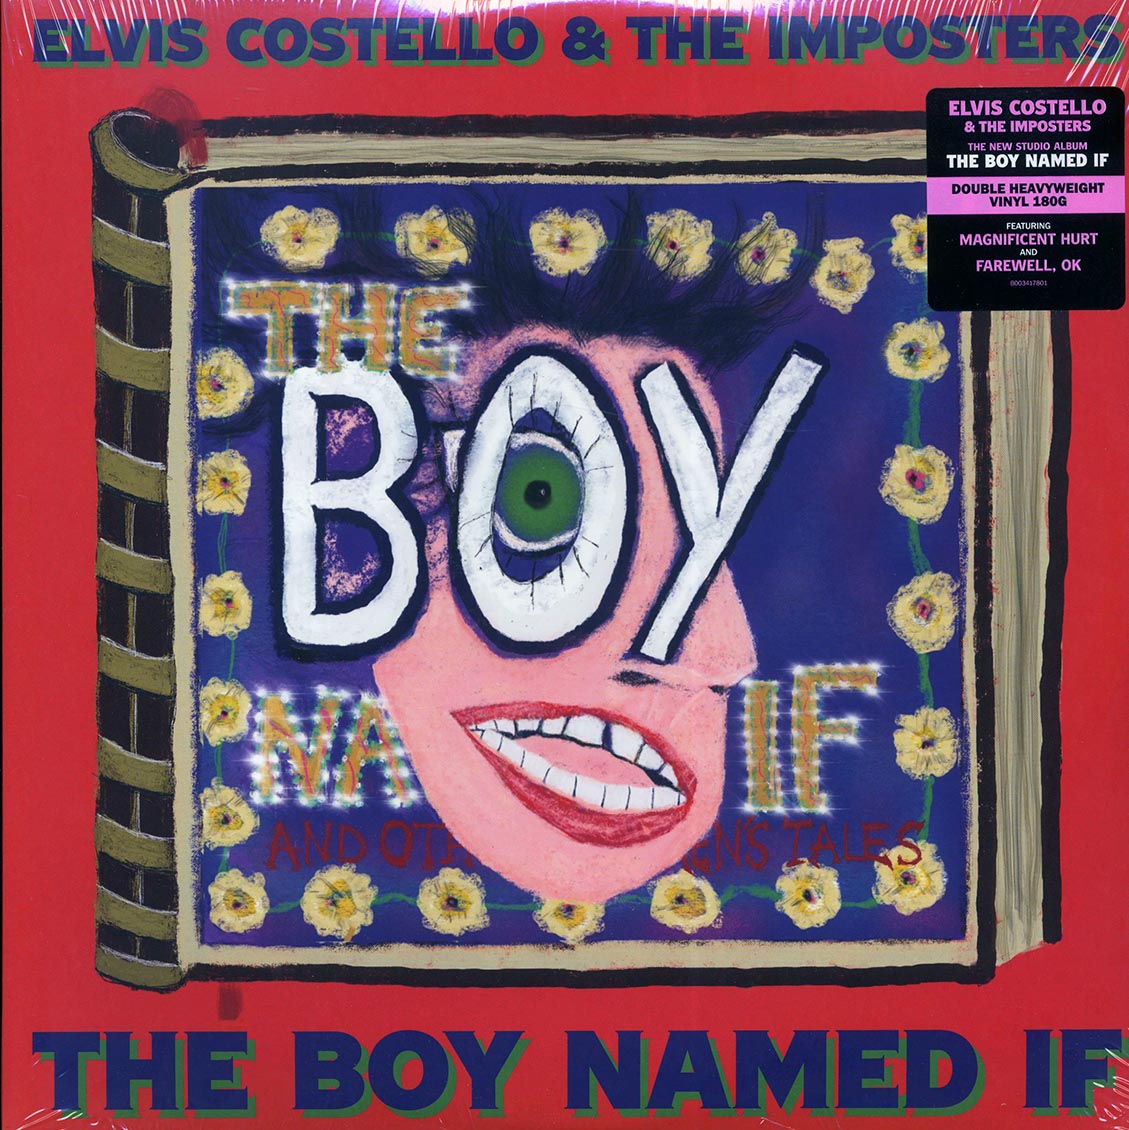 Elvis Costello & The Imposters - The Boy Named If (2xLP) (180g) - Vinyl LP